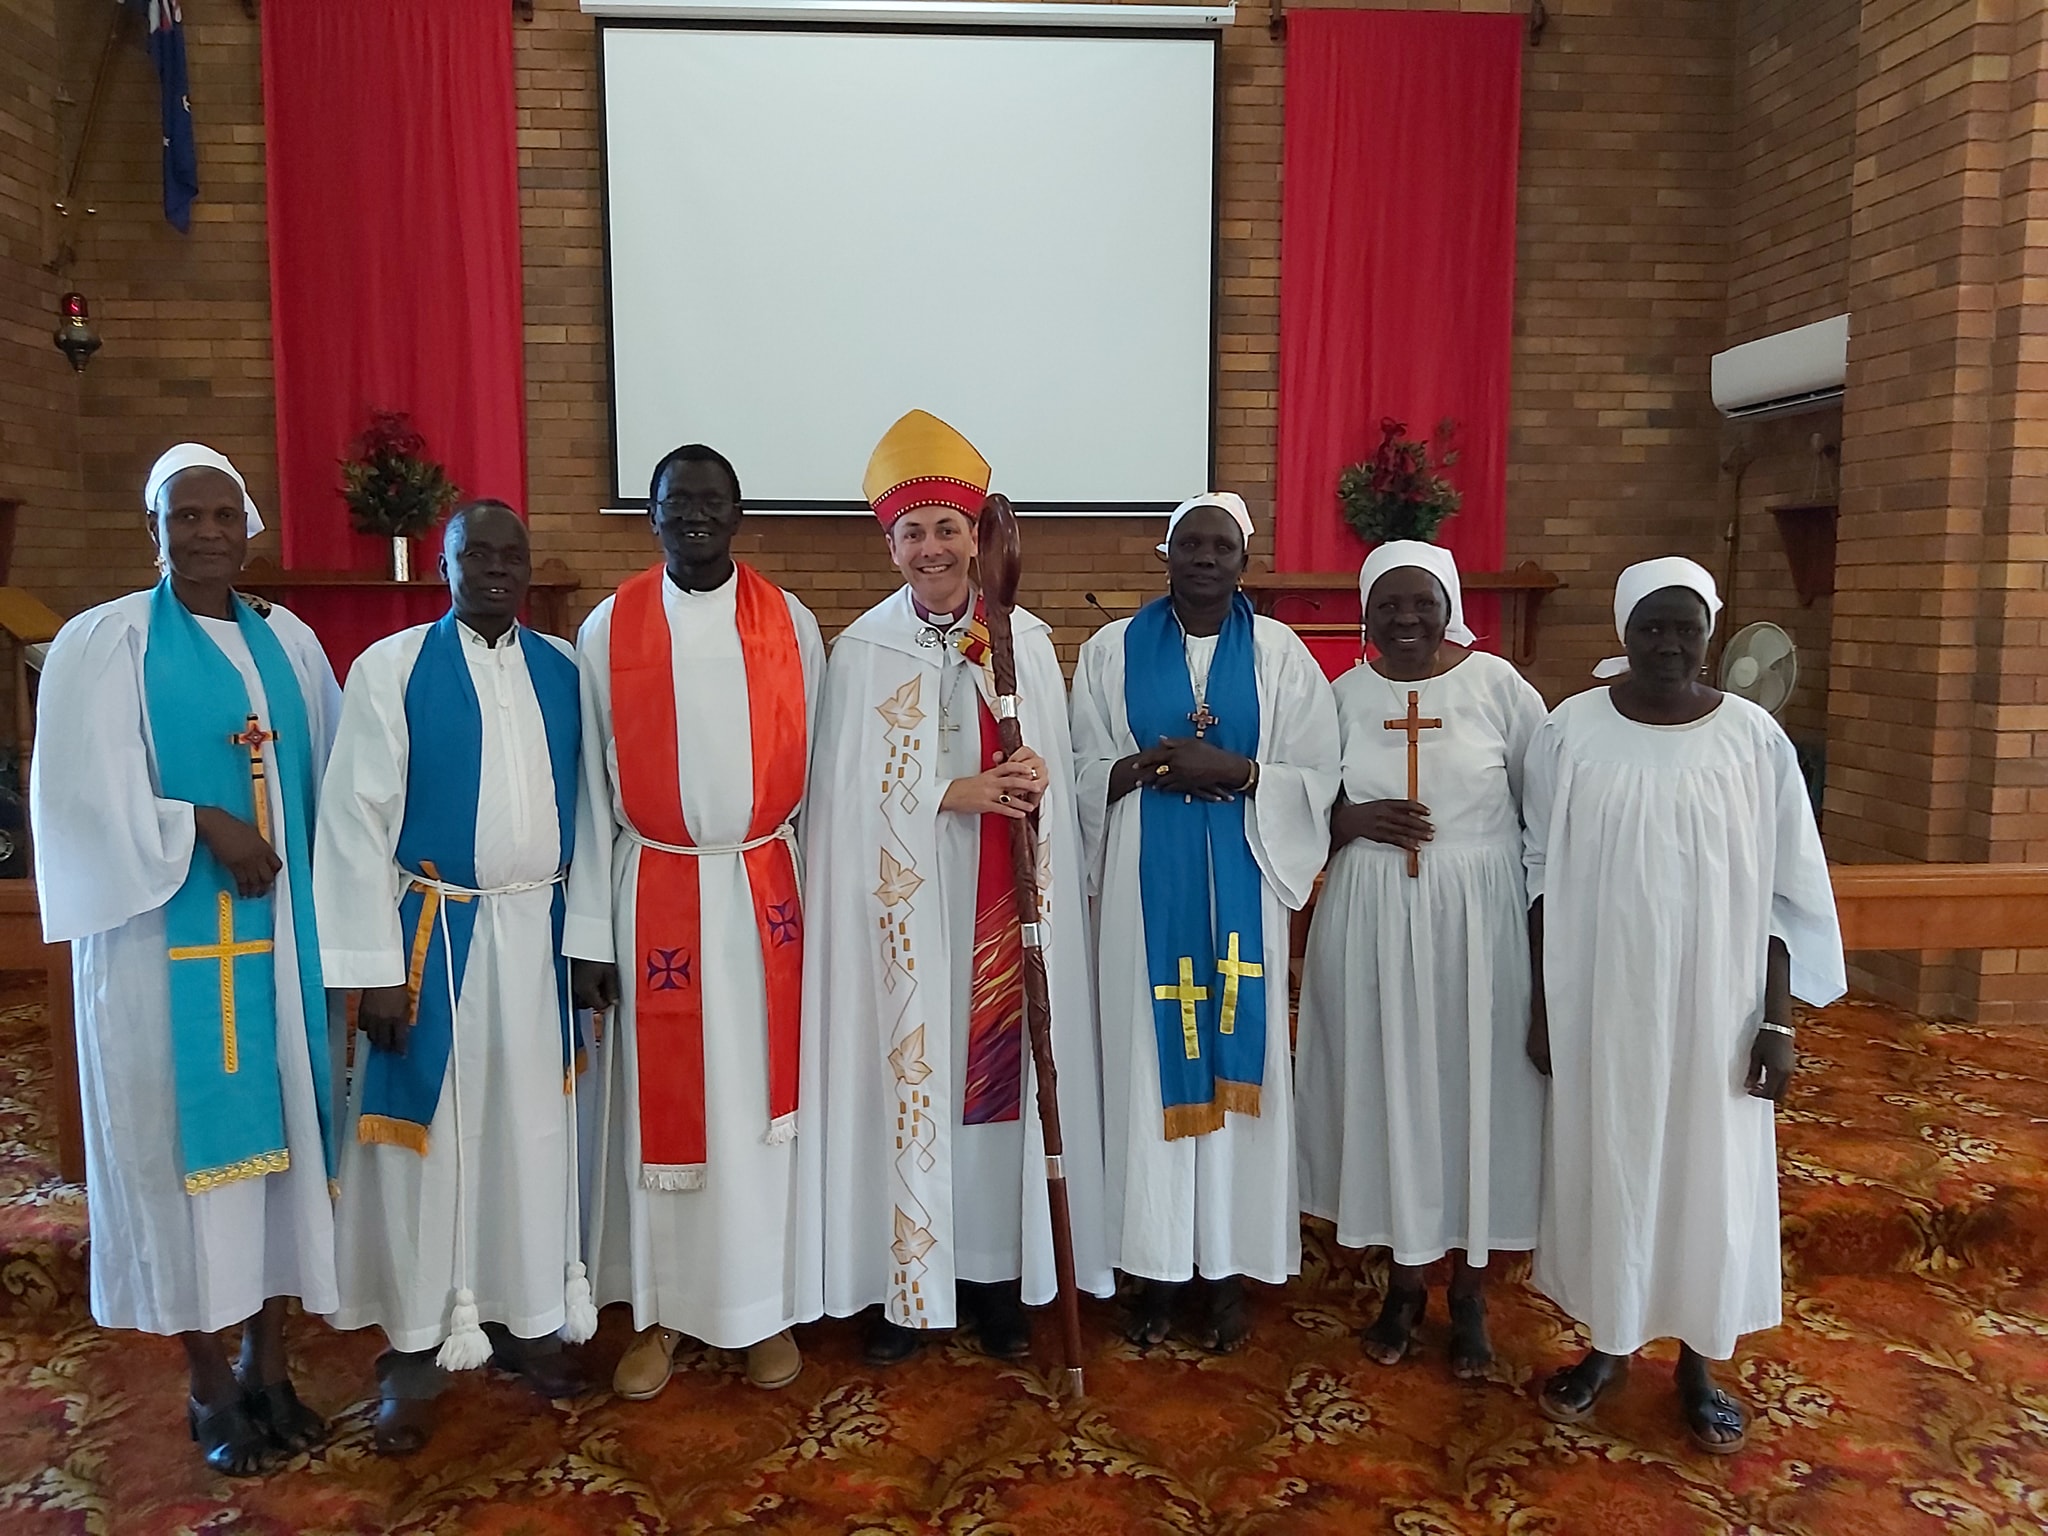 Bishop Jeremy Greaves and The Rev'd David with St Laurence's Anglican Church, Caboolture Sudanese Congregation